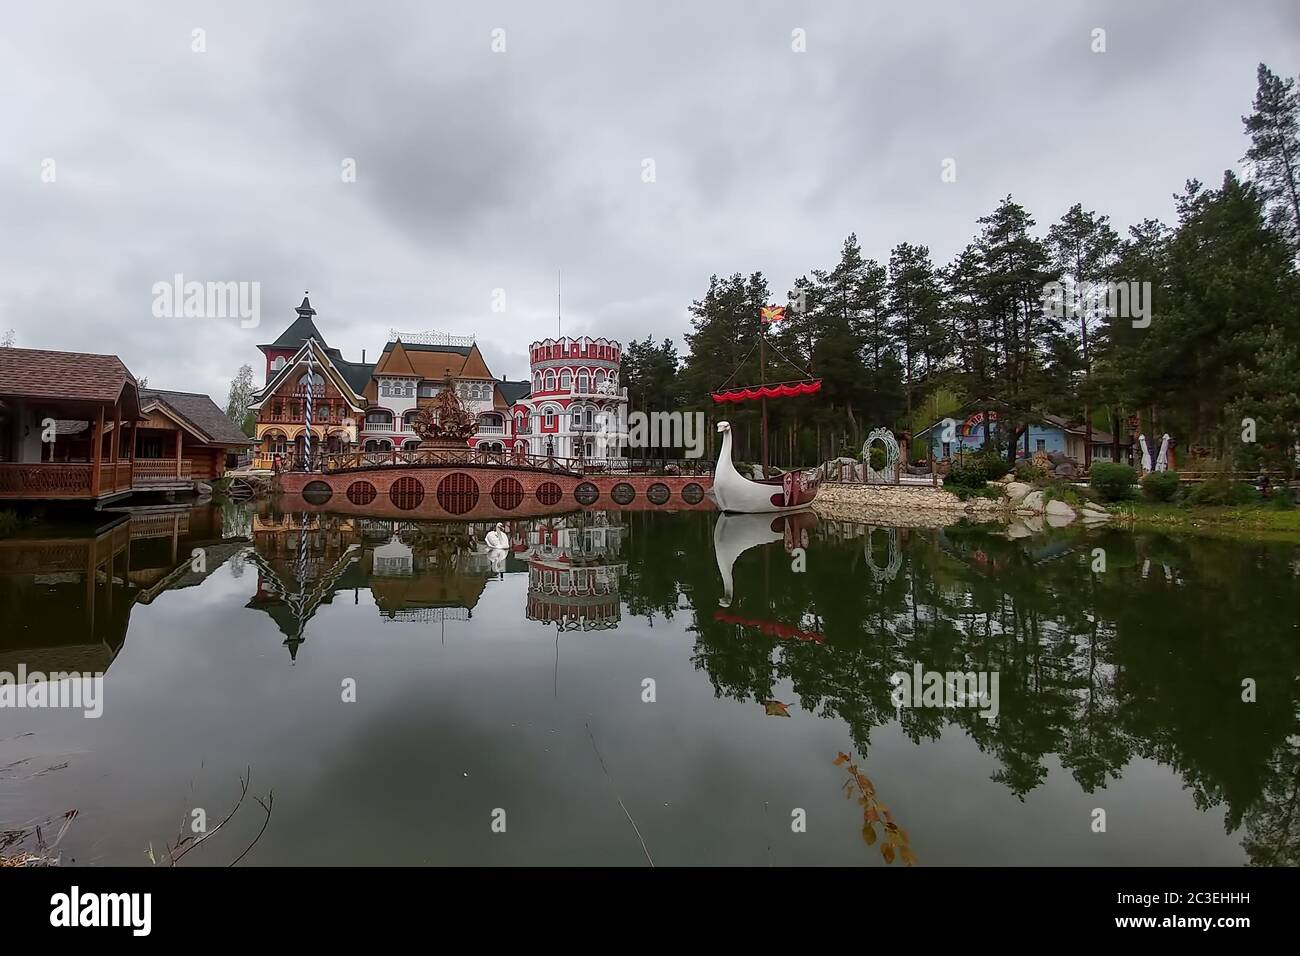 Ryazan, Russia - April 14, 2019: Bridge and lake of Ethnic hotel 'Как v staroy skazke' in Russian style. Hotel 'Like an old fairy tale.' Made in the ethnic Russian style and located in the forest. Stock Photo